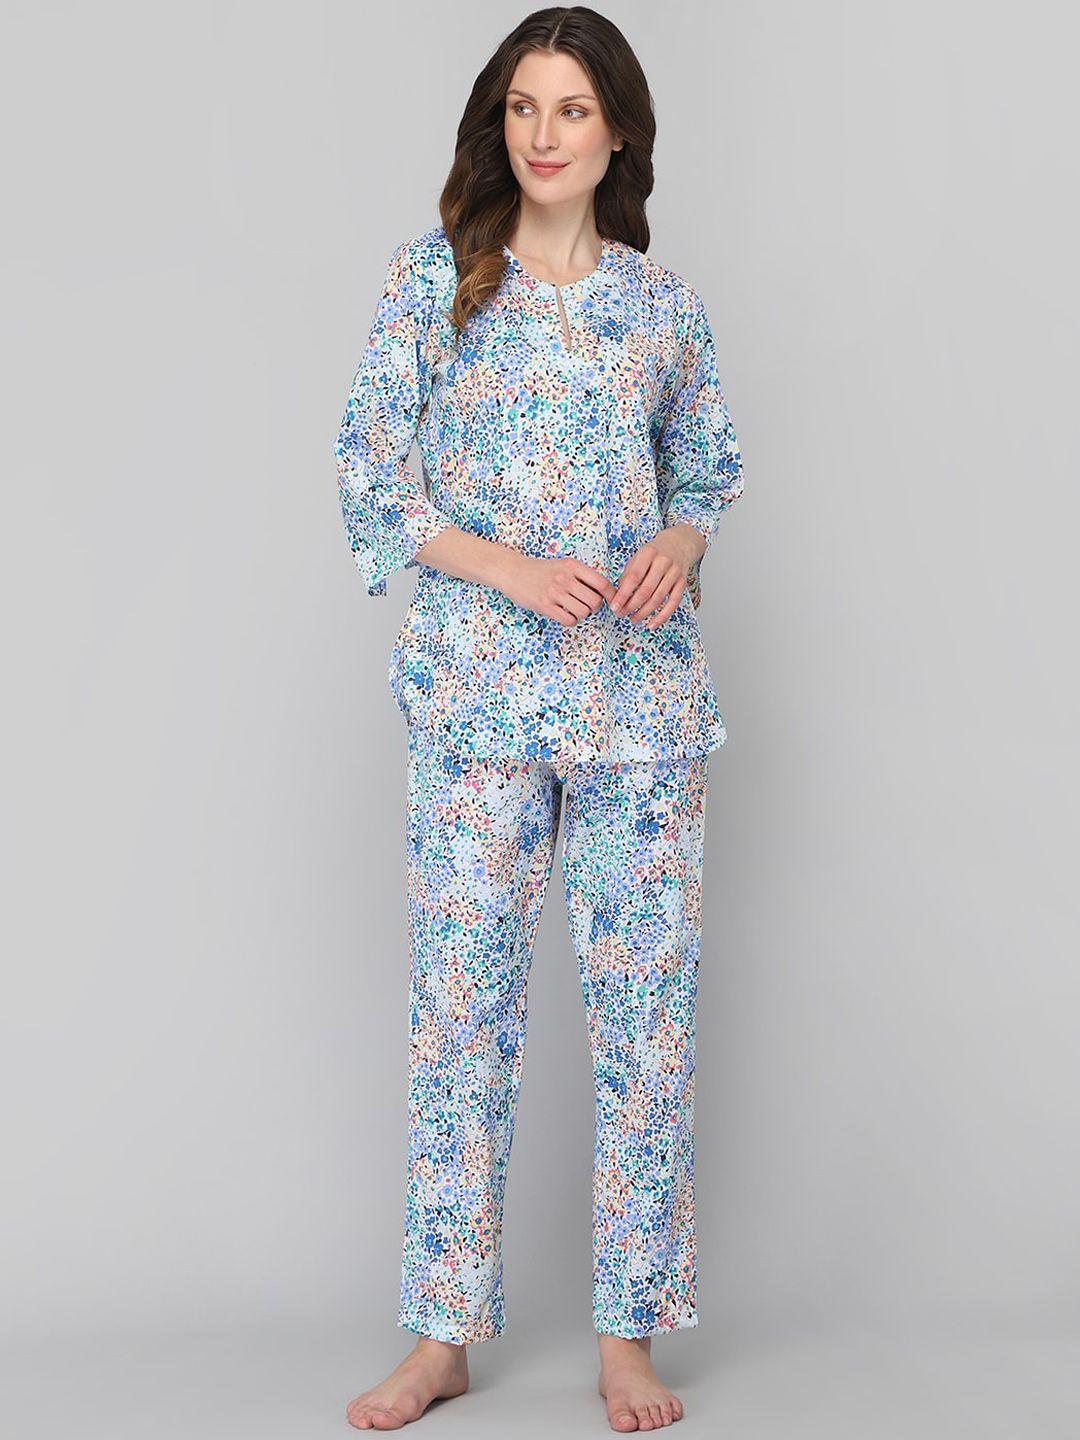 drape-in-vogue-women-off-white-&-blue-printed-night-suit